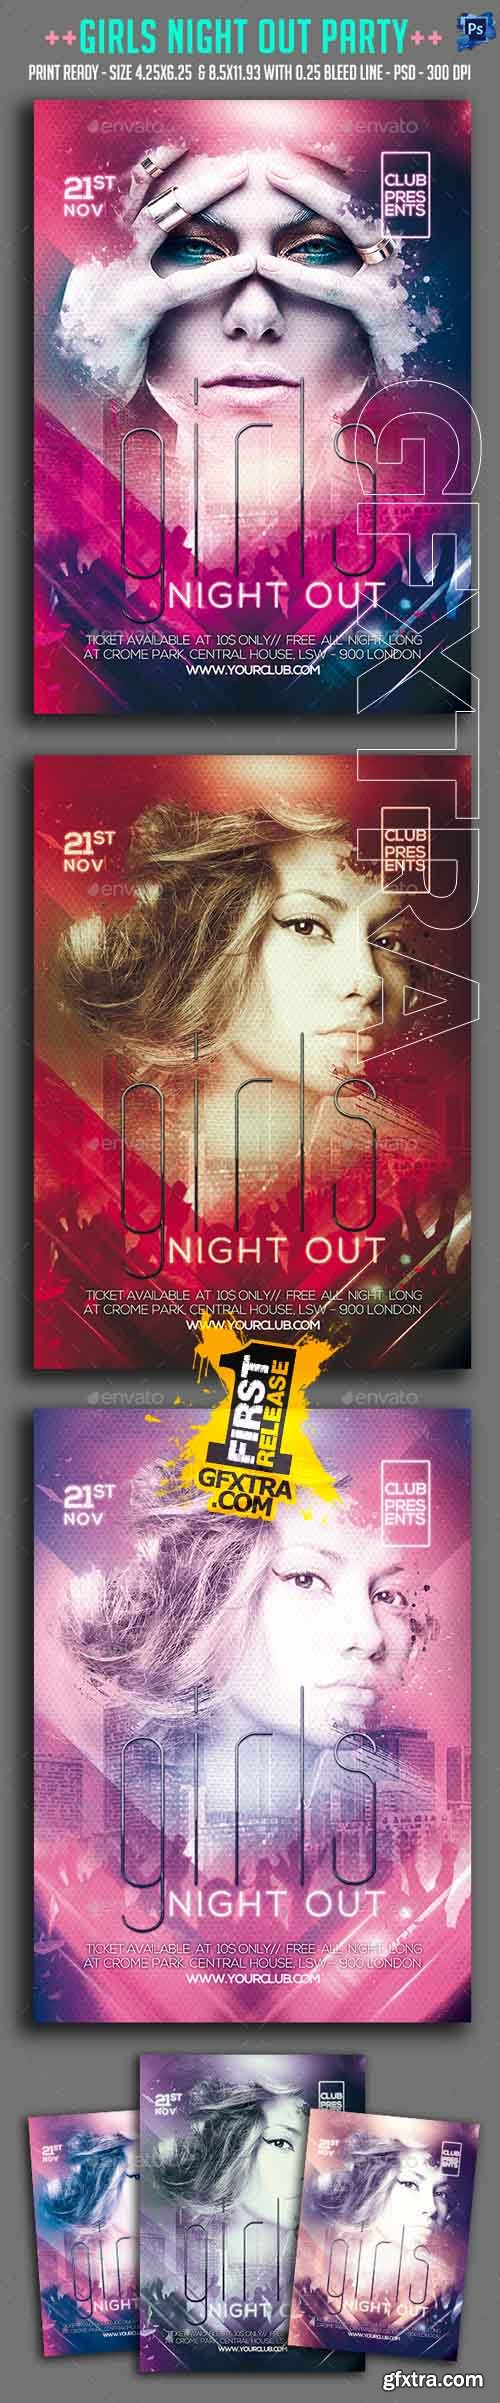 Girls Night Out Party Flyer 13220670